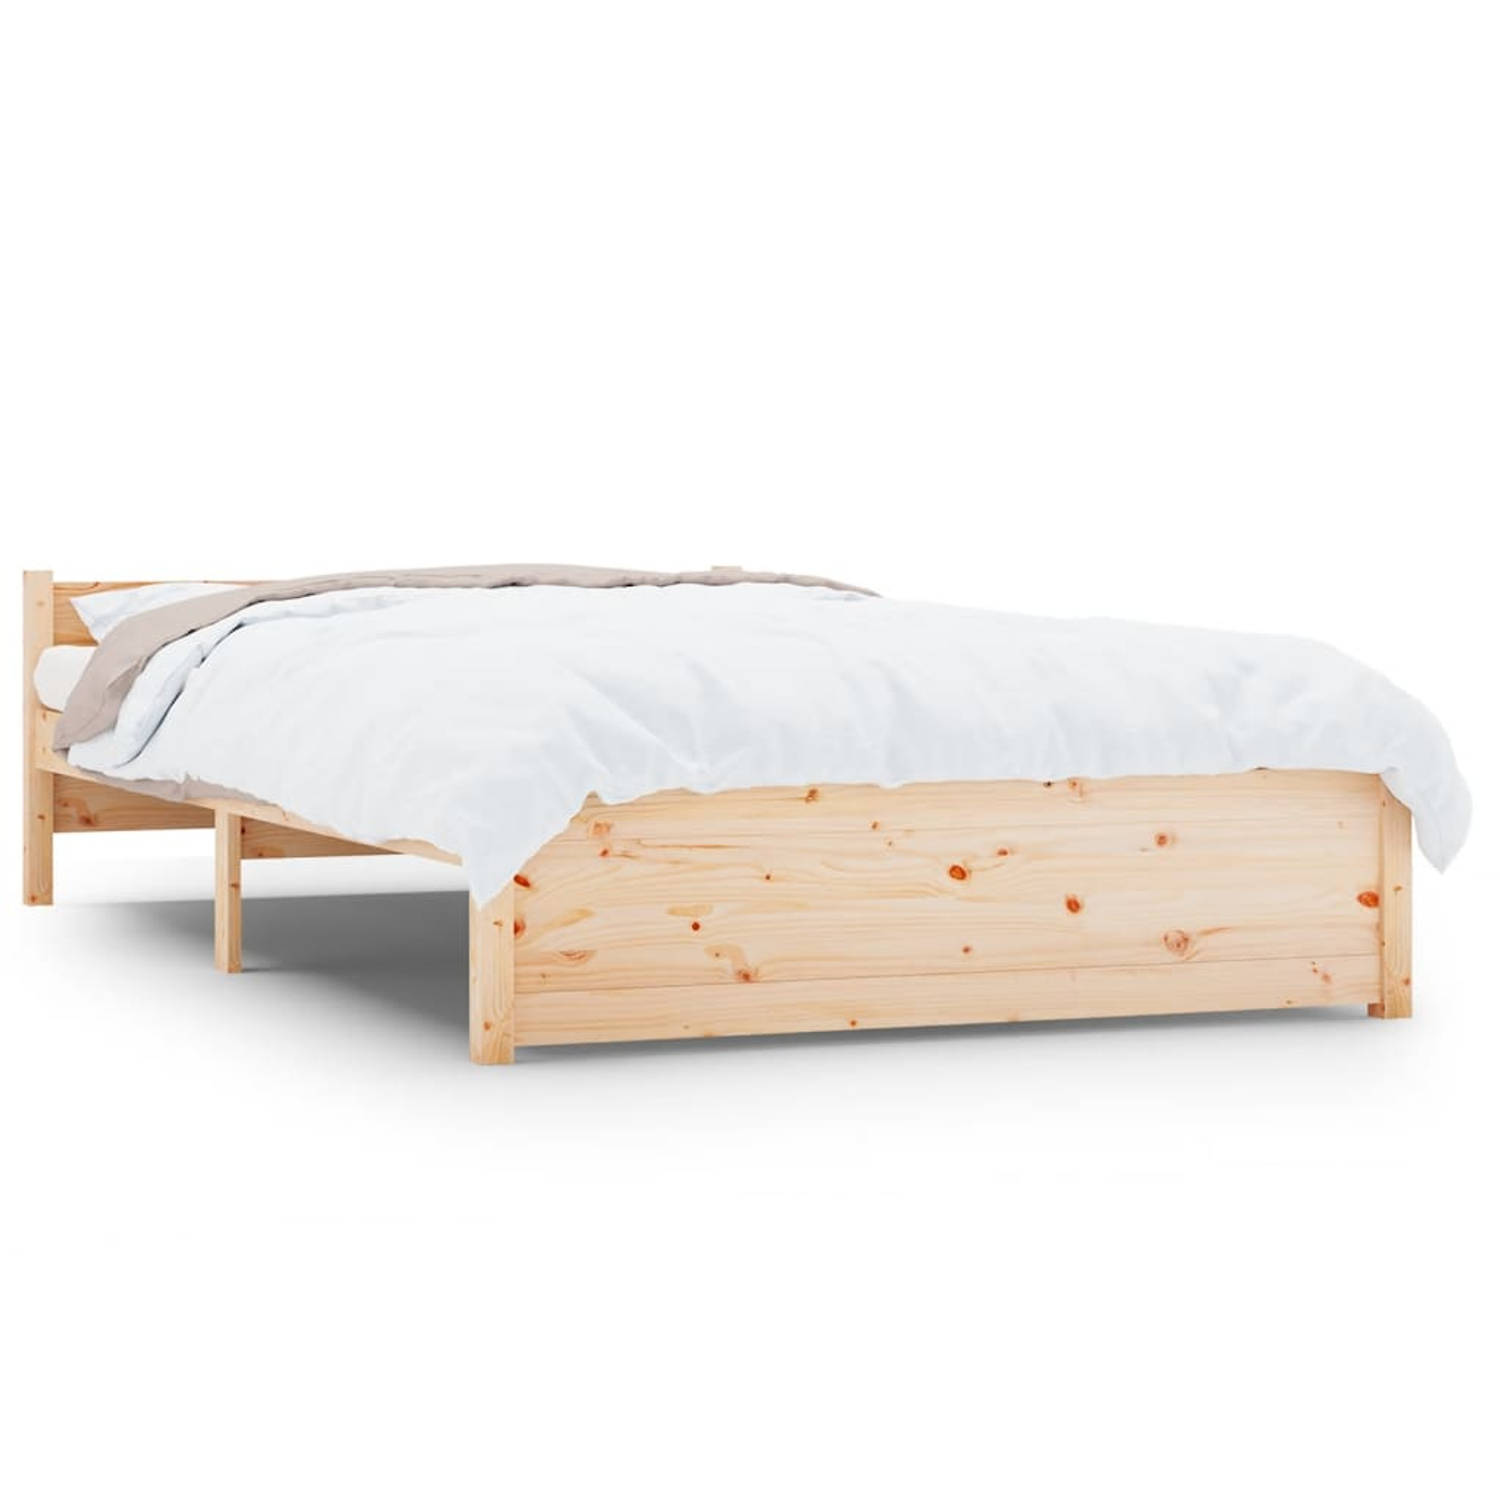 The Living Store Bedframe massief hout 120x200 cm - Bed